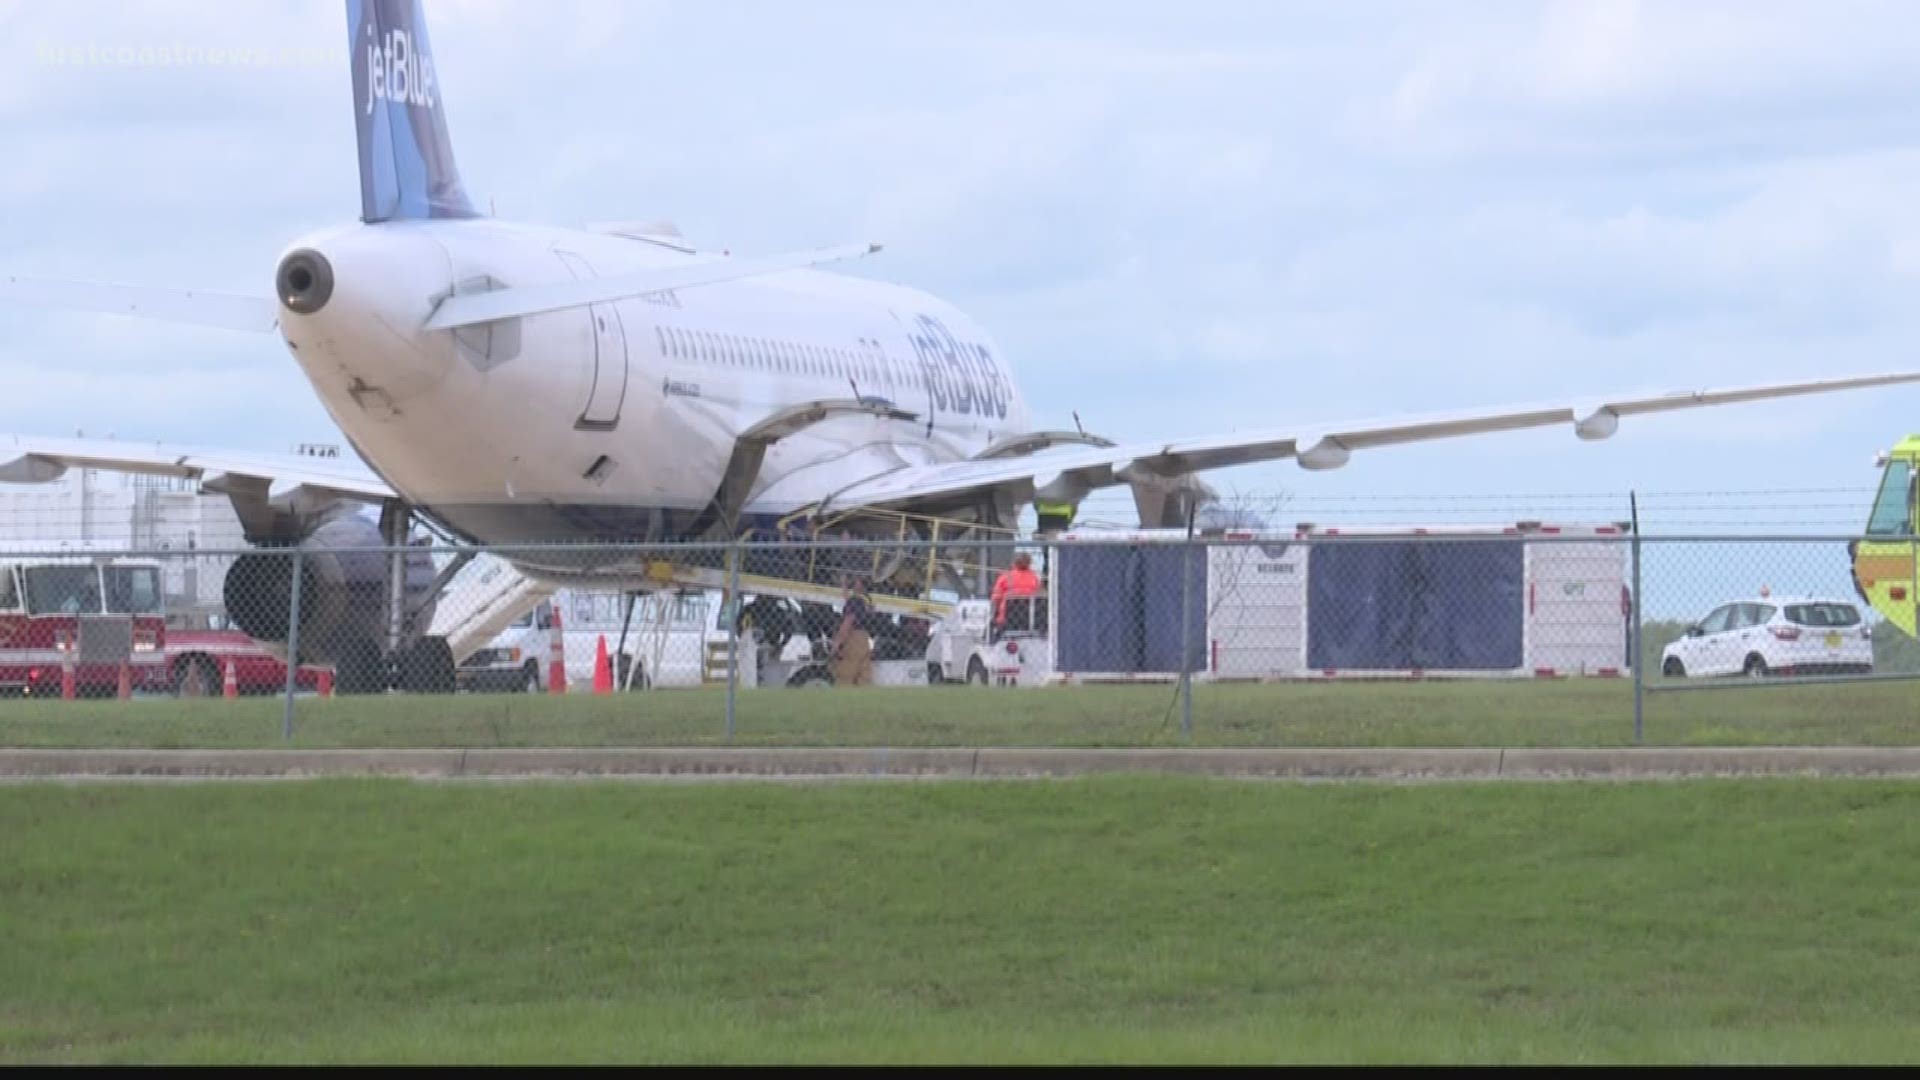 A plane carrying 152 people landed safely in Jacksonville Monday after their plane made an emergency landing due to a fire indicator light.